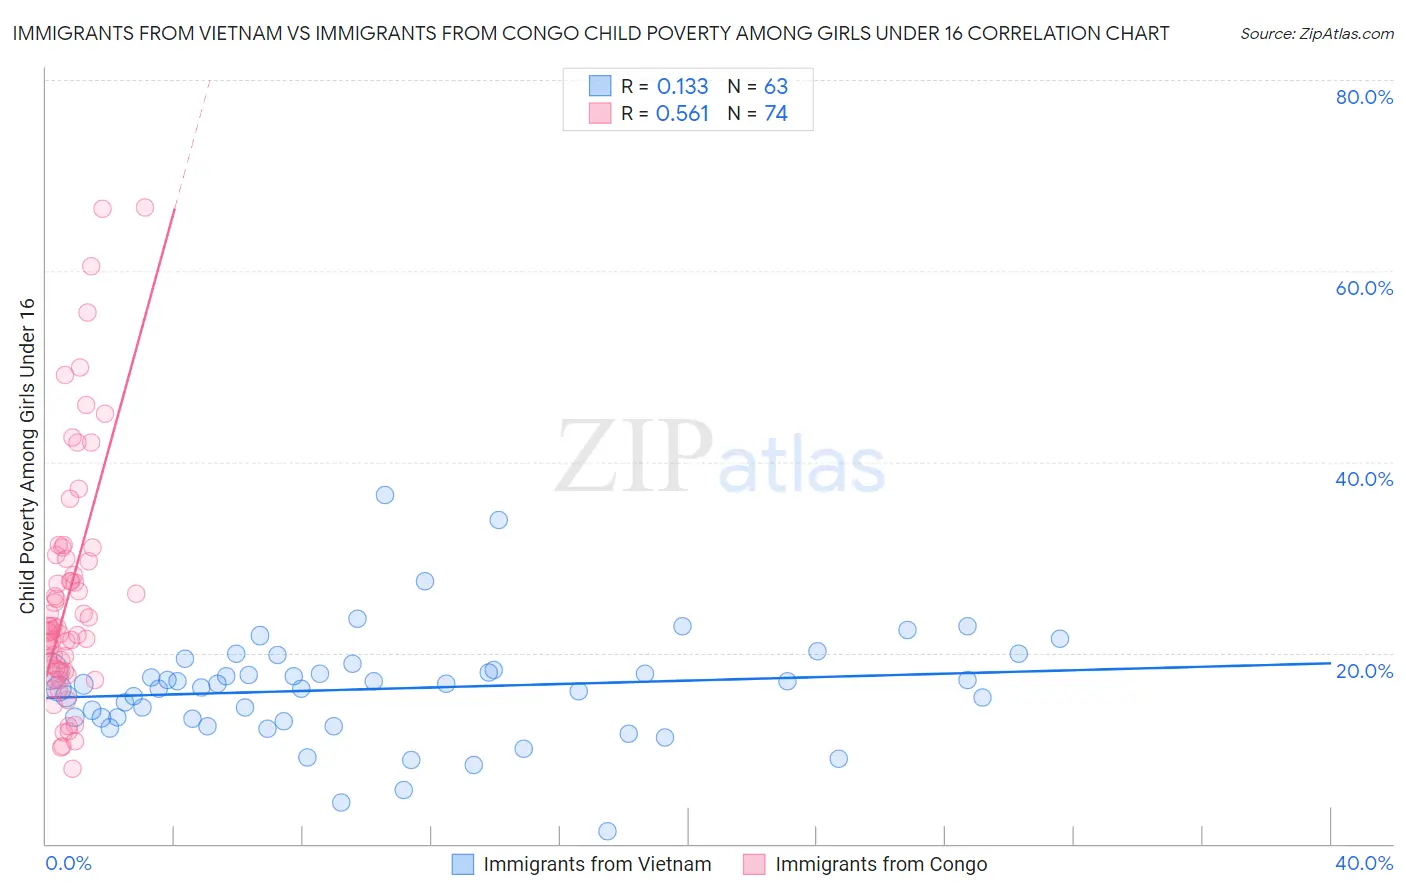 Immigrants from Vietnam vs Immigrants from Congo Child Poverty Among Girls Under 16